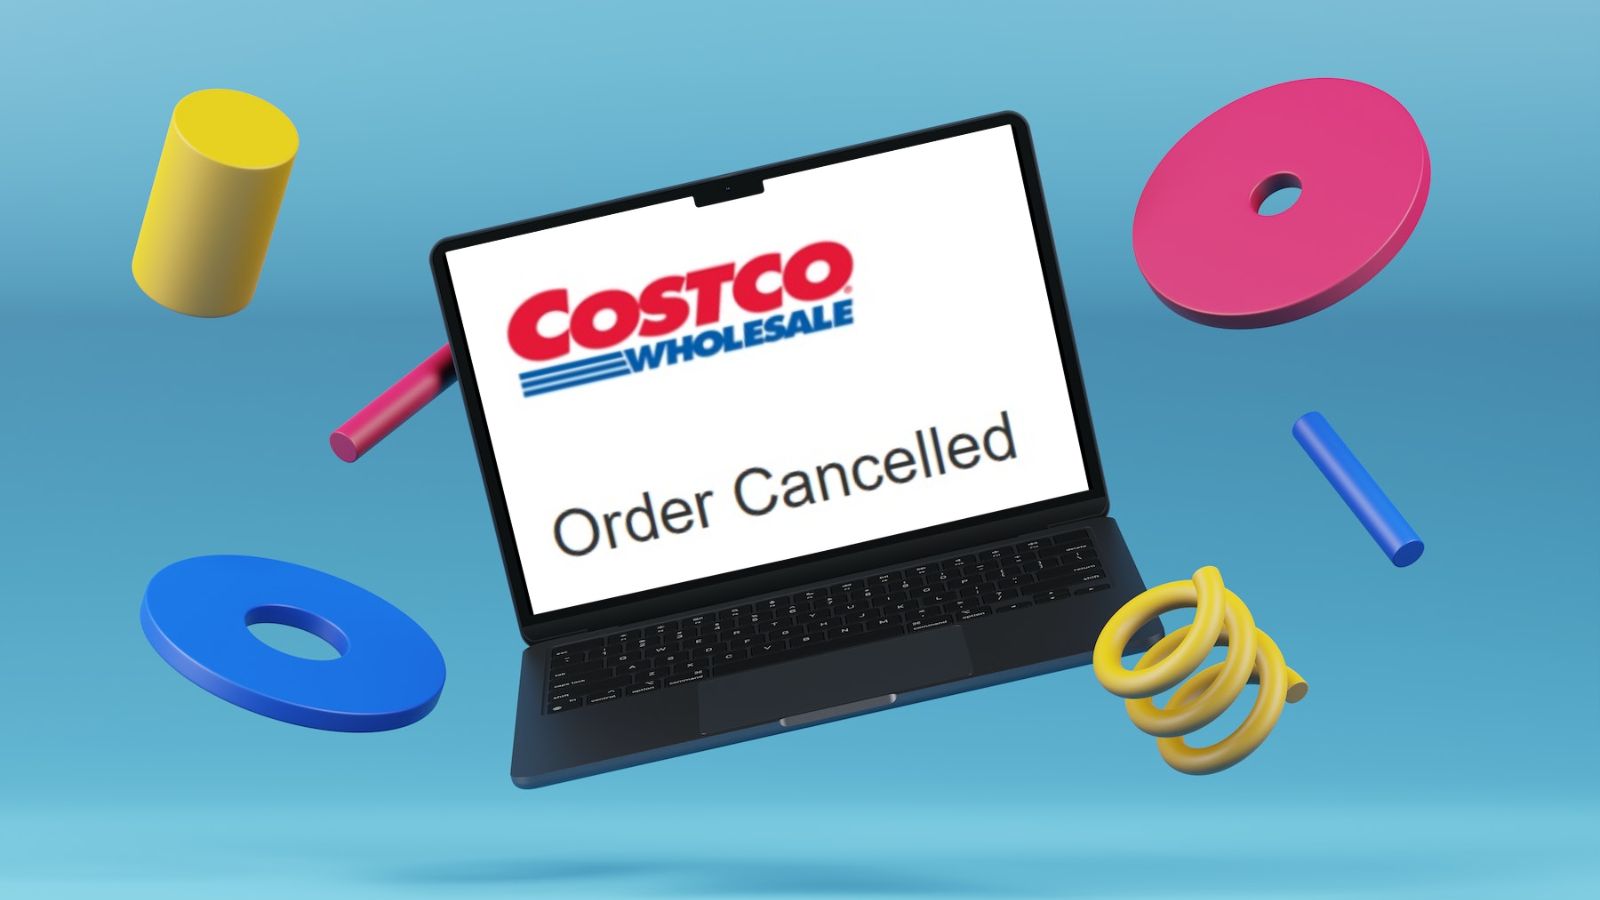 Image shows computer with the words "Order Cancelled" from Costco